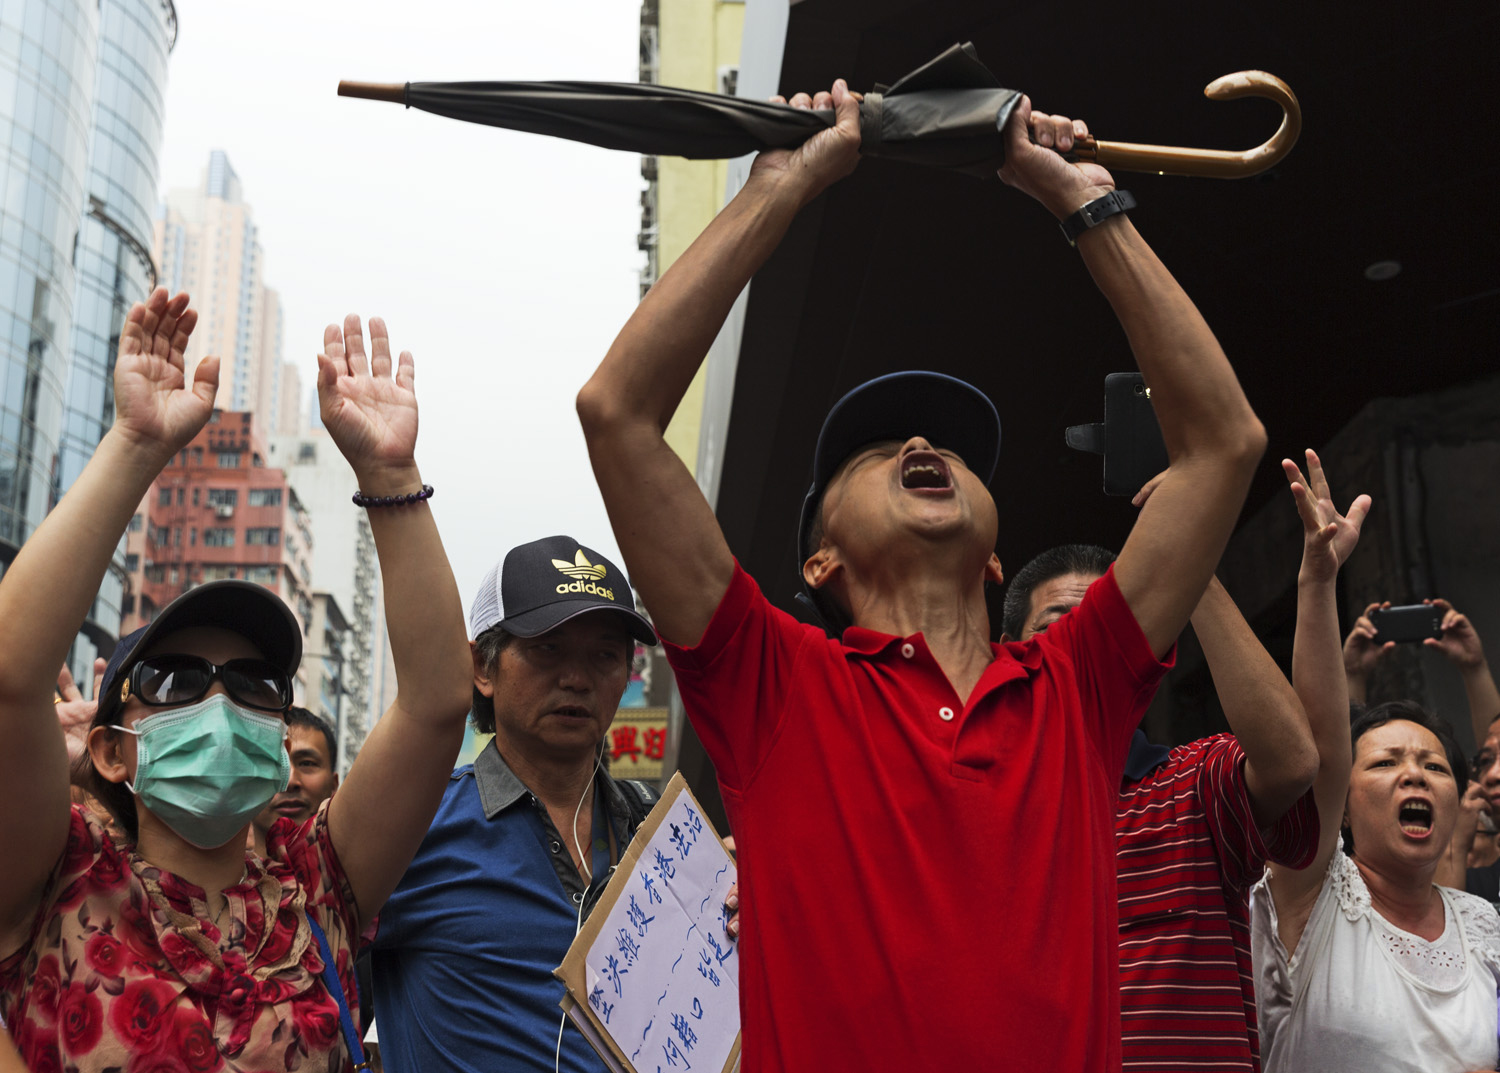 Democracy demonstrations in Hong Kong. Students and pro-democracy citizens being attacked and shouted at by anti-demonstration group in Mongkok. Pro-police rally. Joshua Wong, 17-year-old protest leader.by James Nachtwey